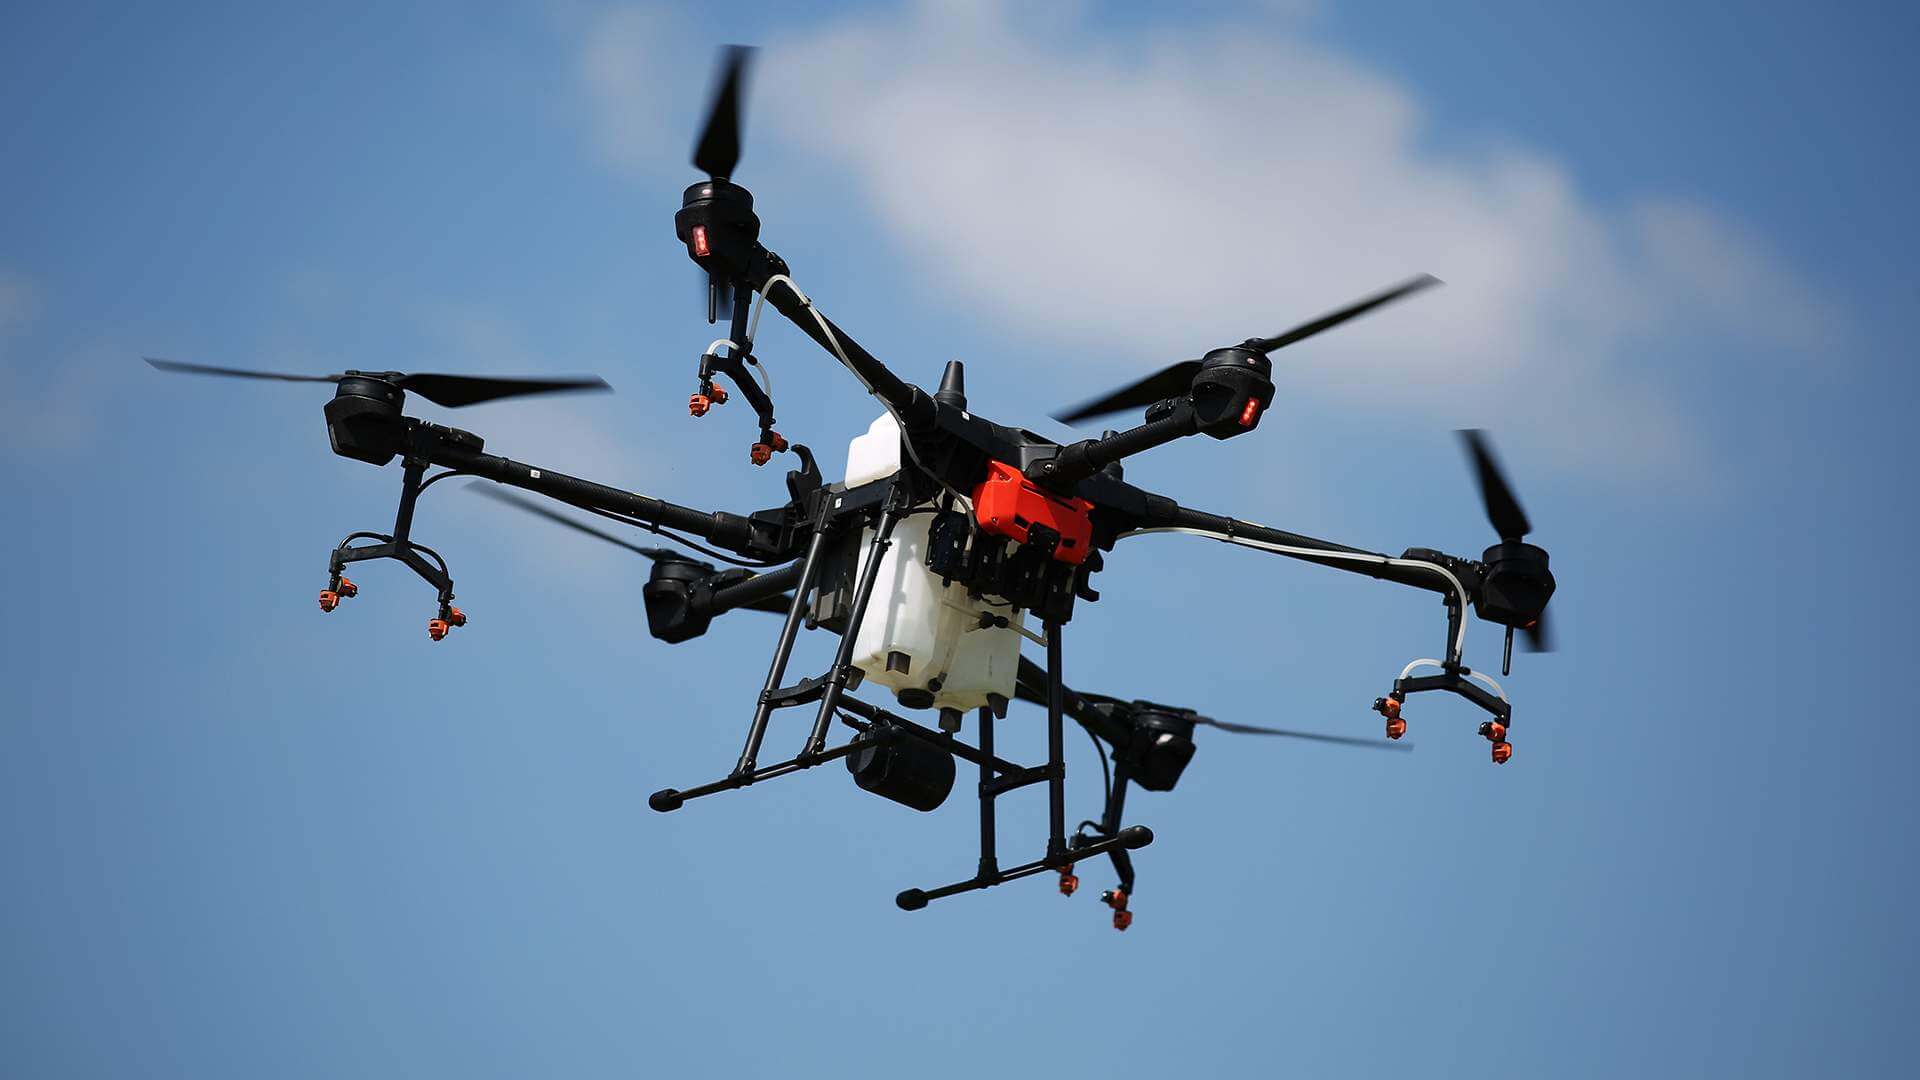 A ban on storage, import and use of drones was introduced in Belarus